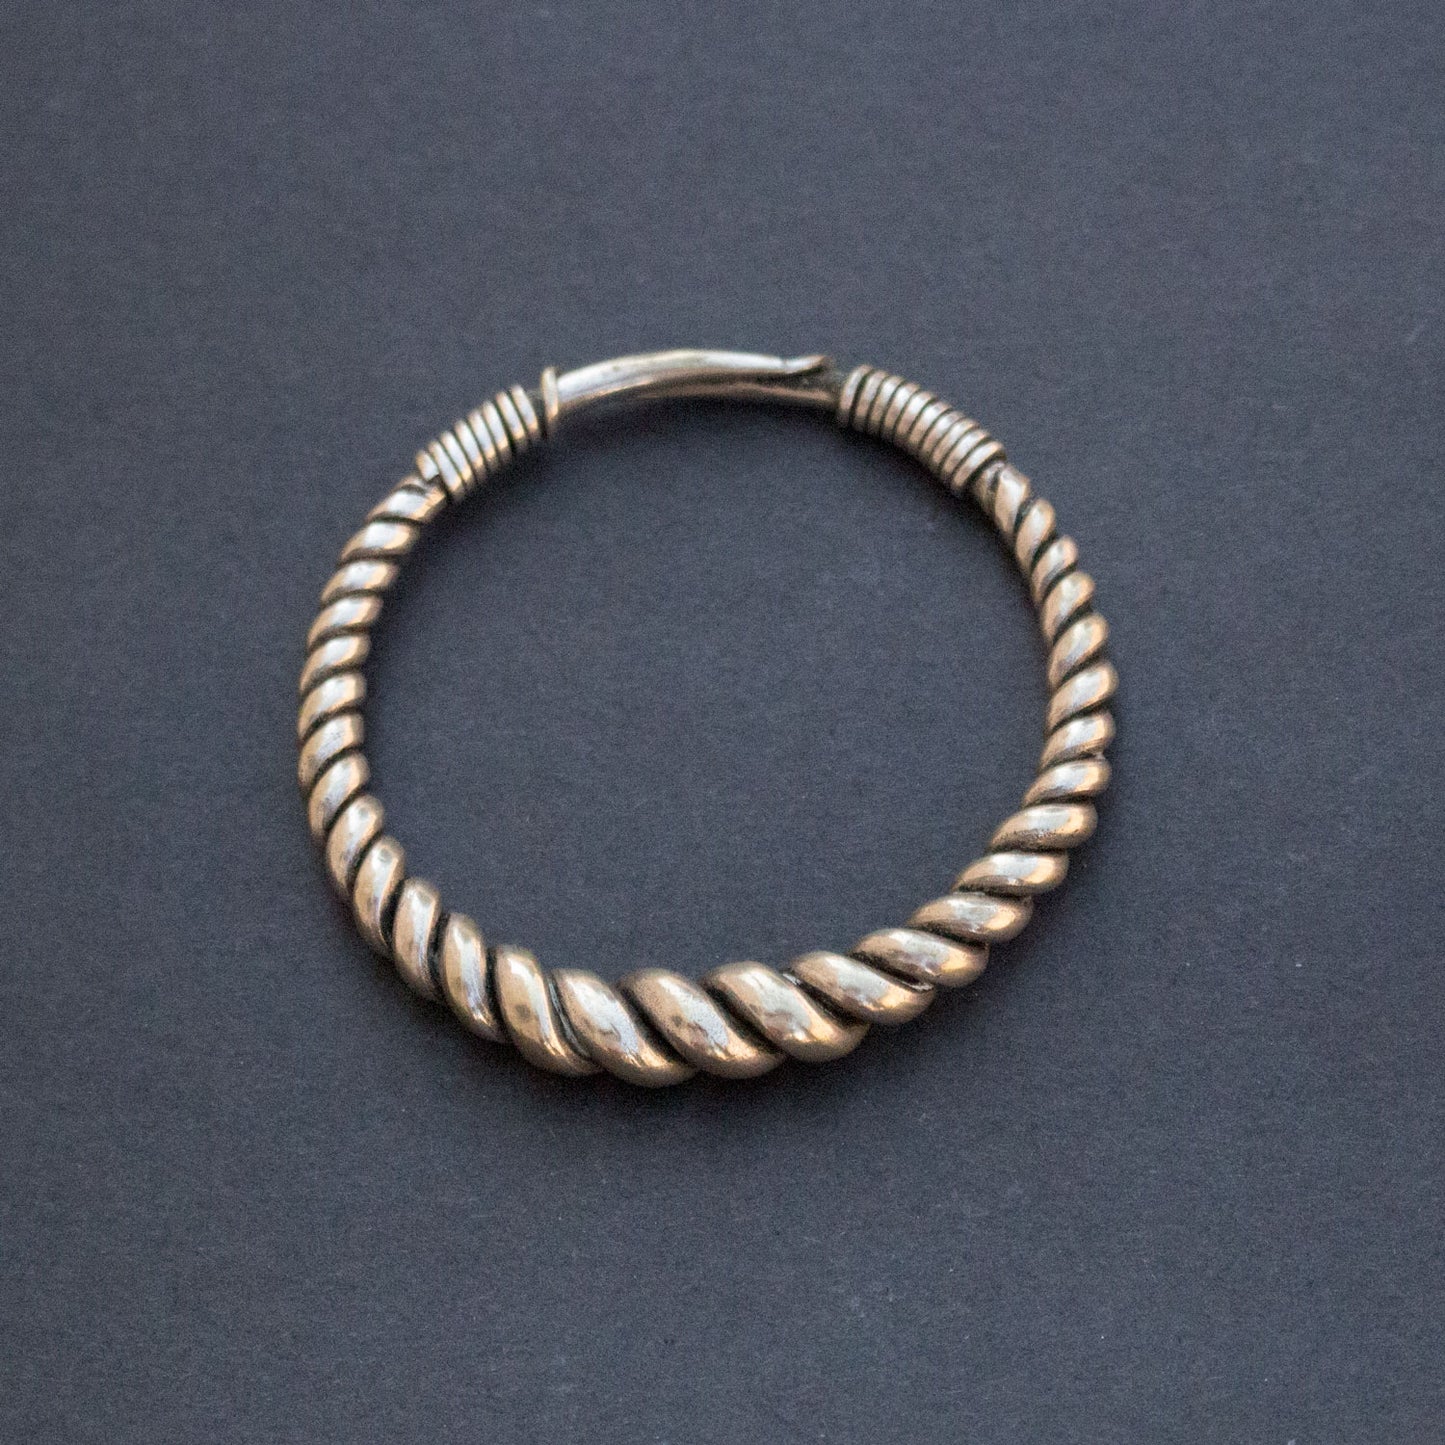 Vintage sterling silver twisted wire bangle